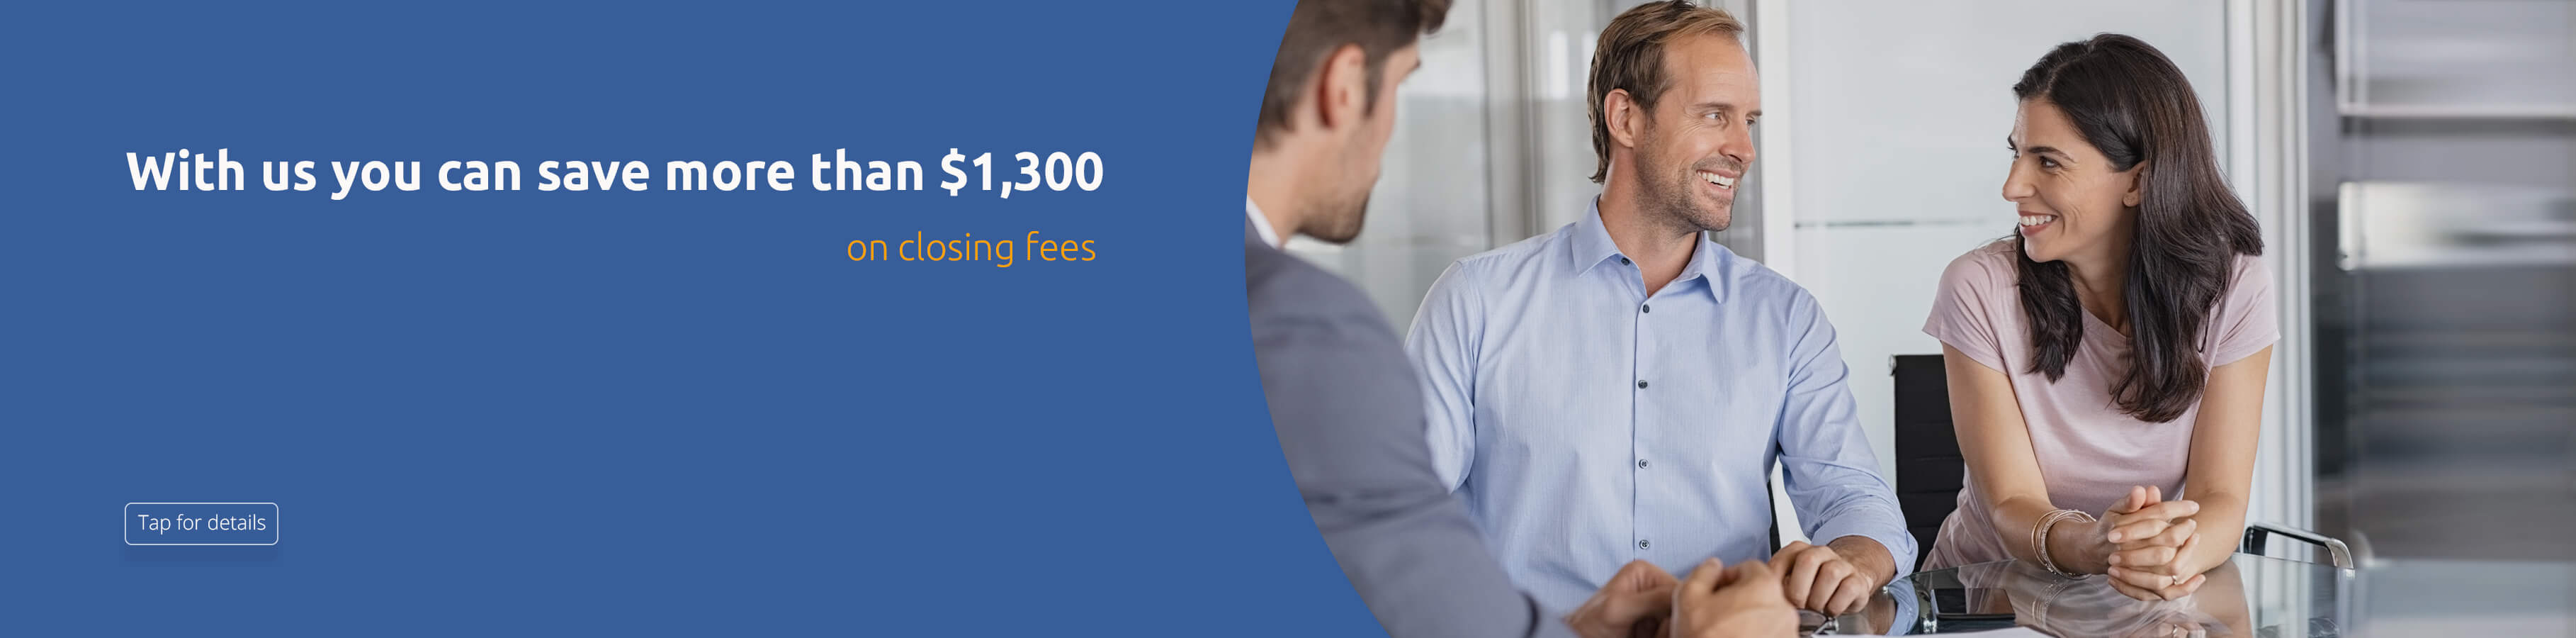 With us you can save more than $1,300 on closing fees. Tap for details